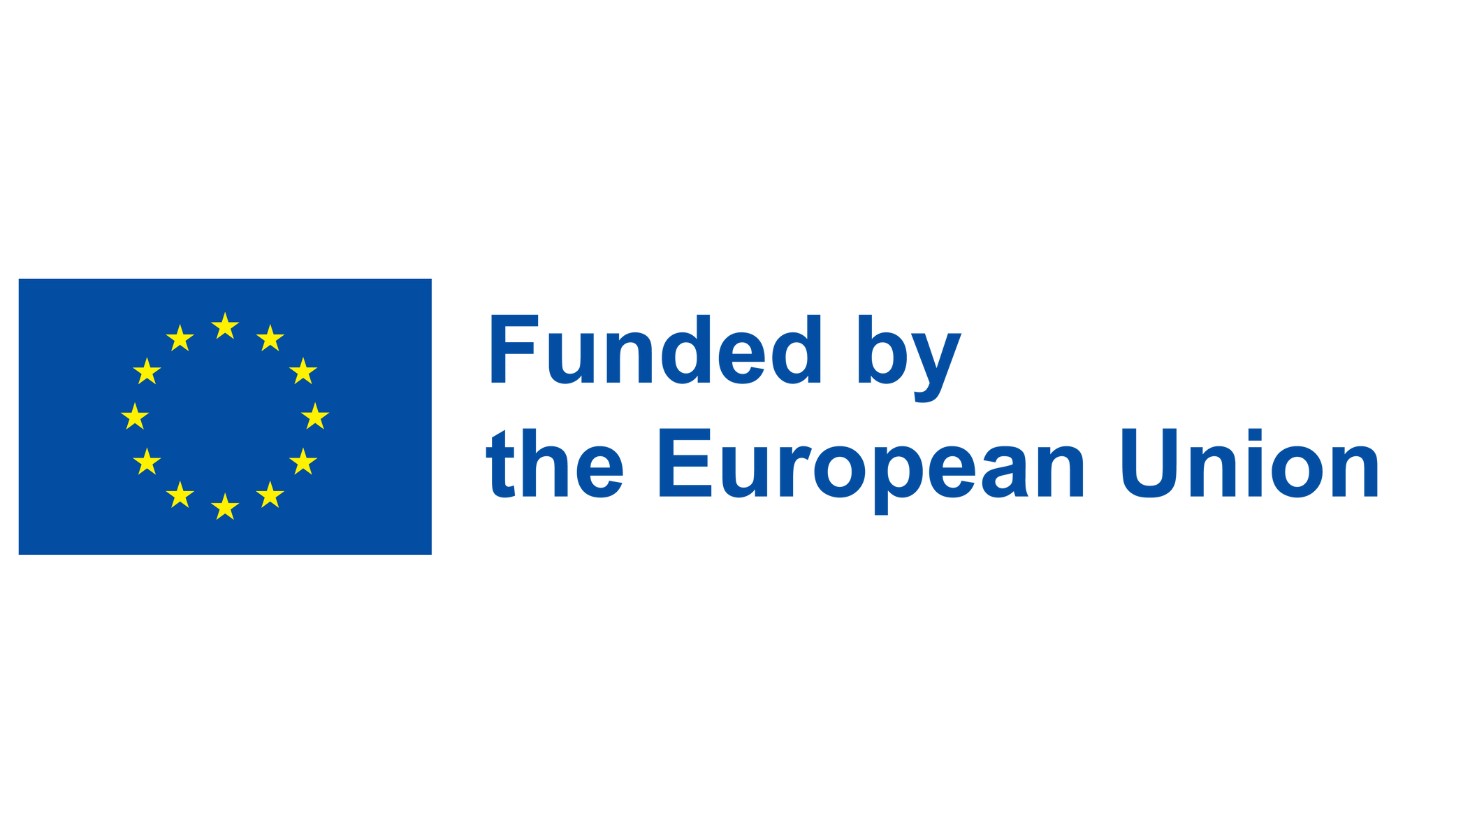 Funded by the EU